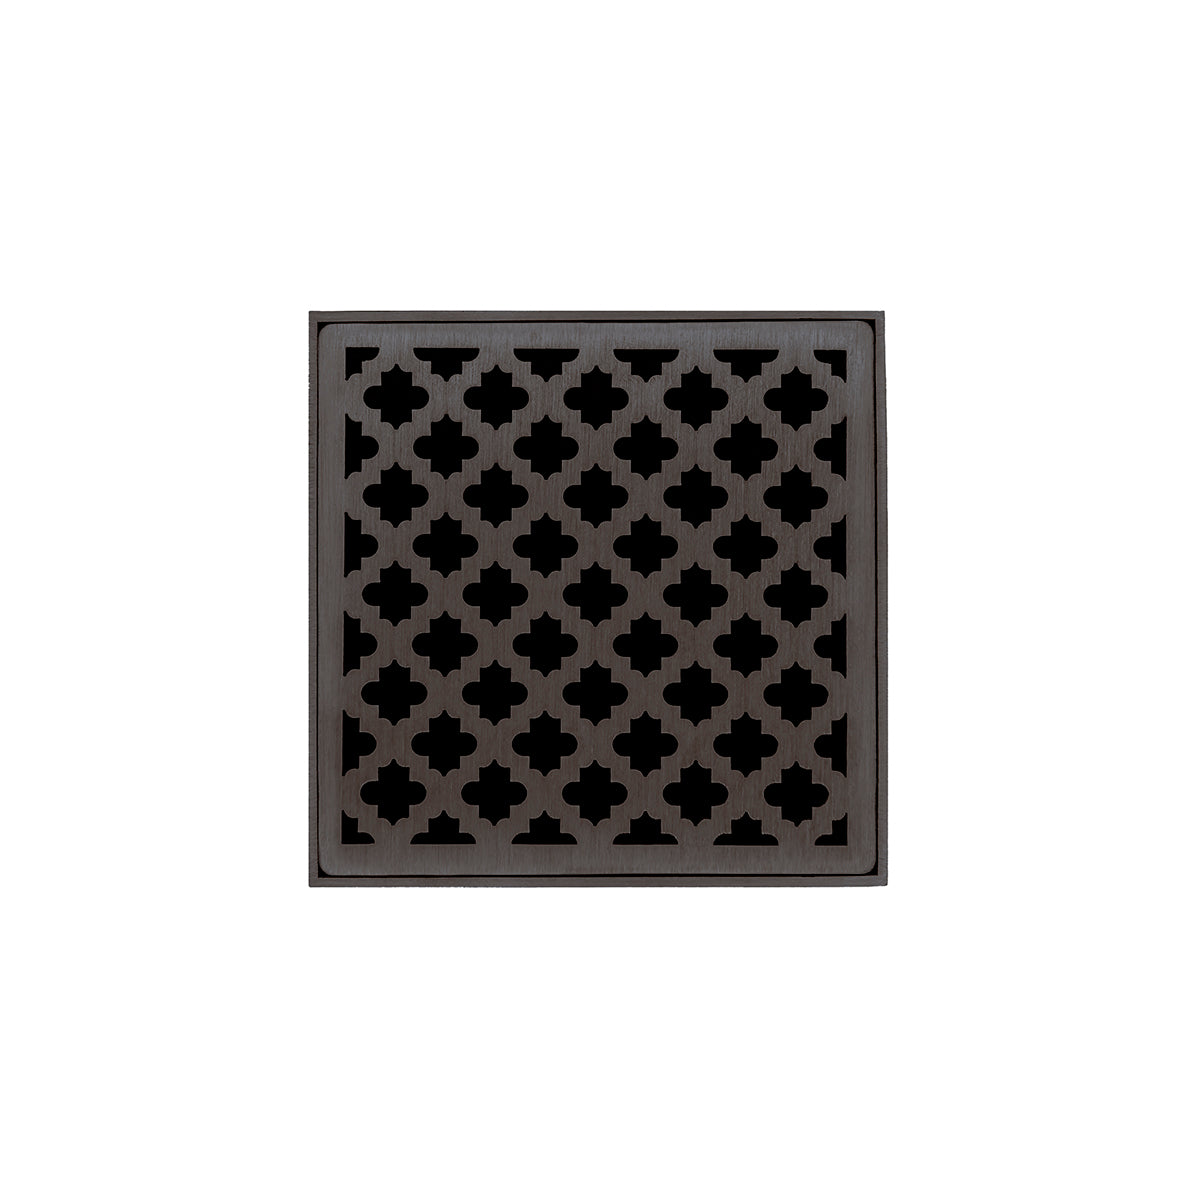 Infinity Drain 5" x 5" MD 5 High Flow Premium Center Drain Kit with Moor Pattern Decorative Plate with ABS Drain Body, 3" Outlet